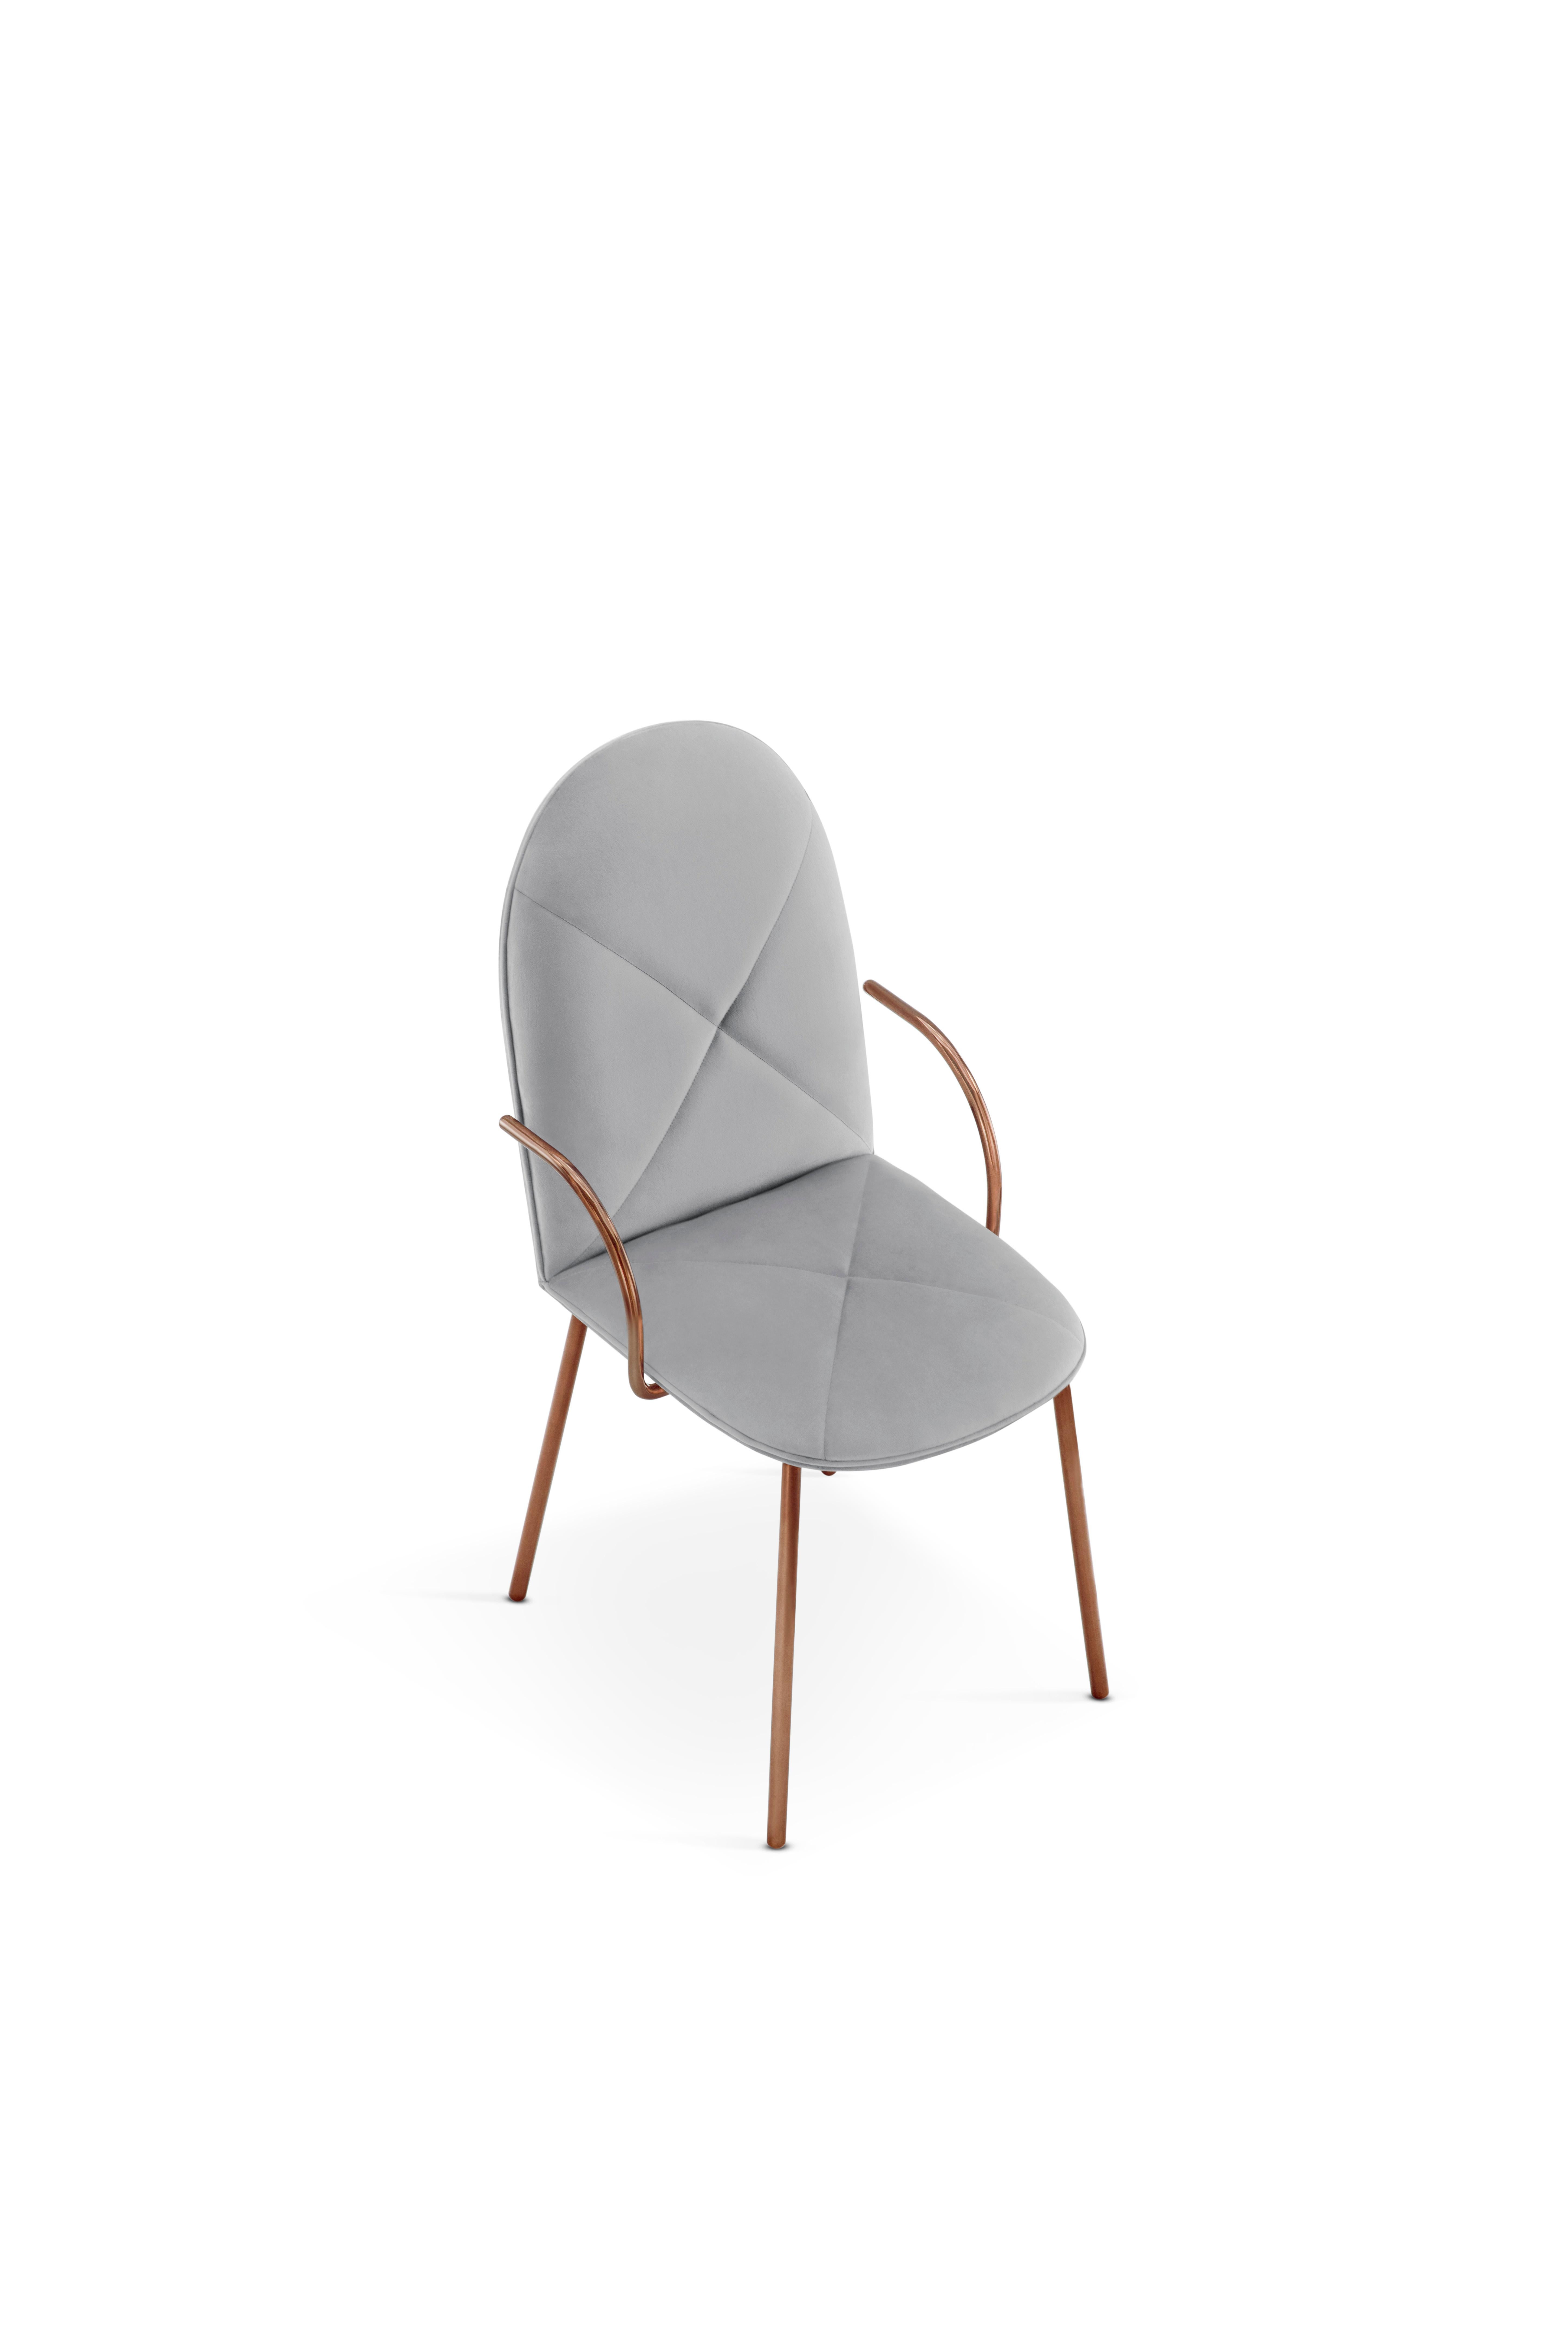 Indian Orion Dining Chair with Plush Gray Velvet and Rose Gold Arms by Nika Zupanc For Sale